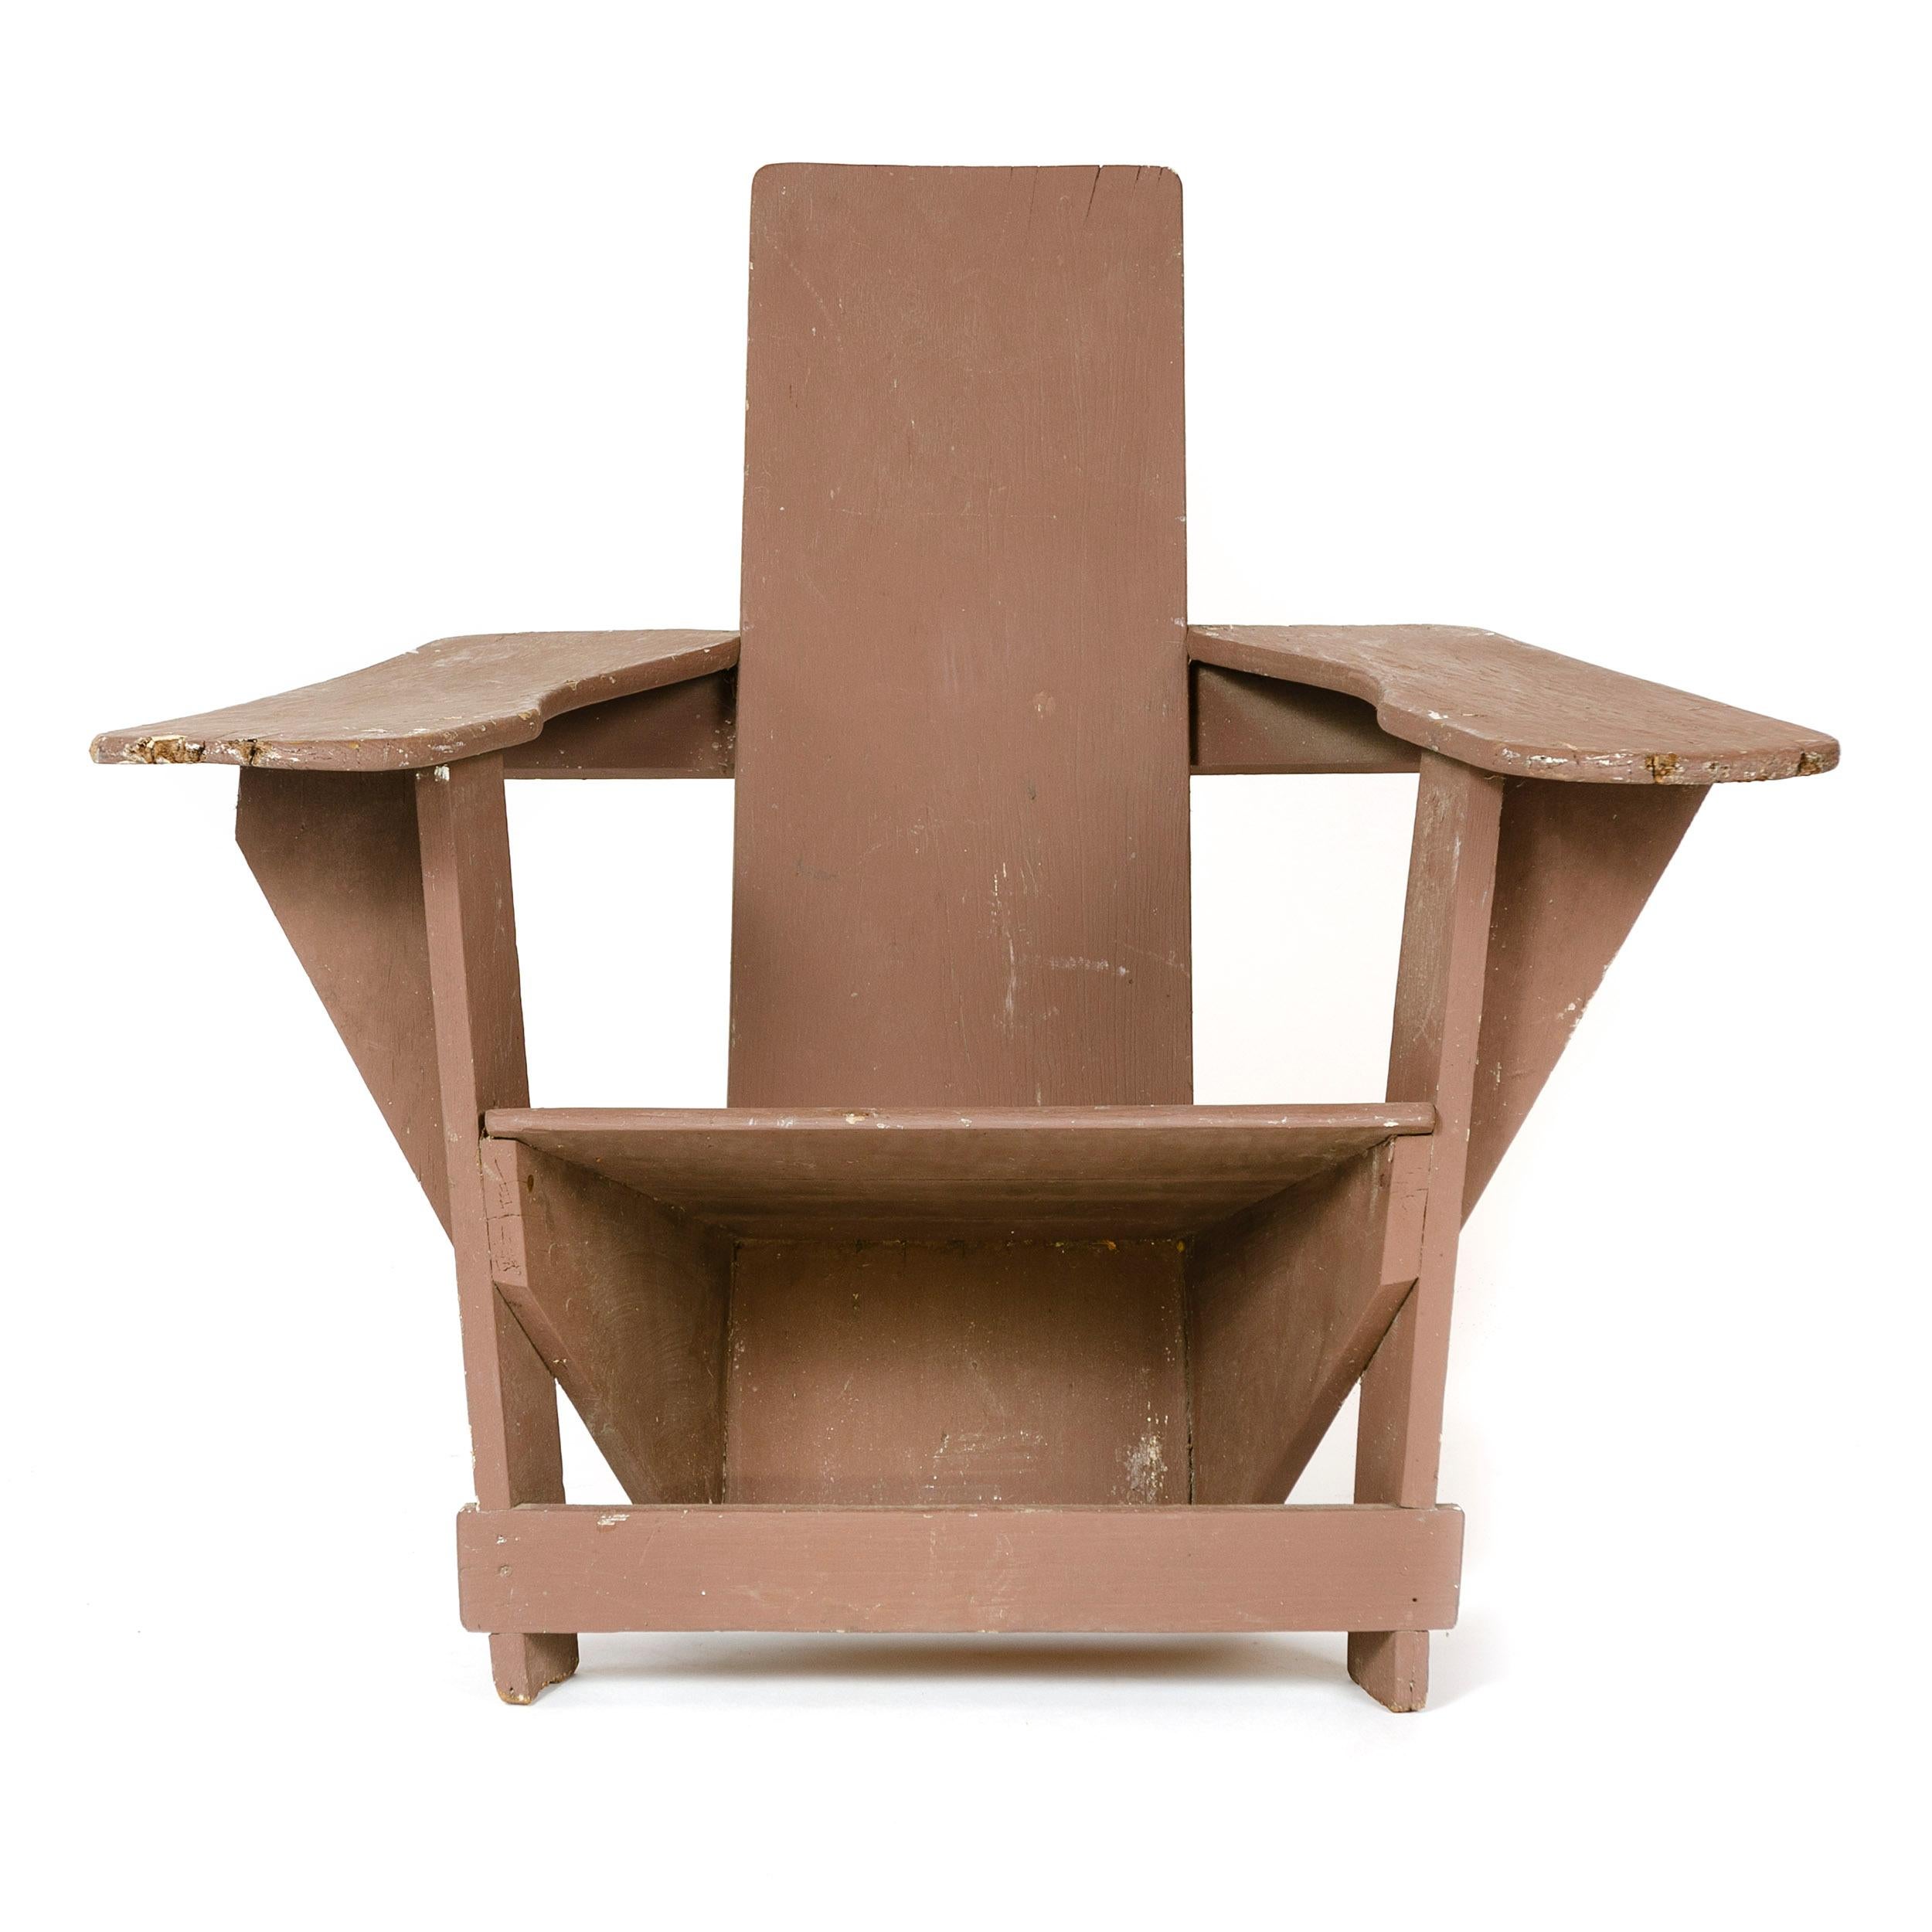 Profoundly innovative and original, the ‘Westport’ Adirondack chair a century after its introduction remains a tribute to the creativity of Americas’ indigenous designers/craftsmen. Named after the rural town in New York state’s Adirondack region